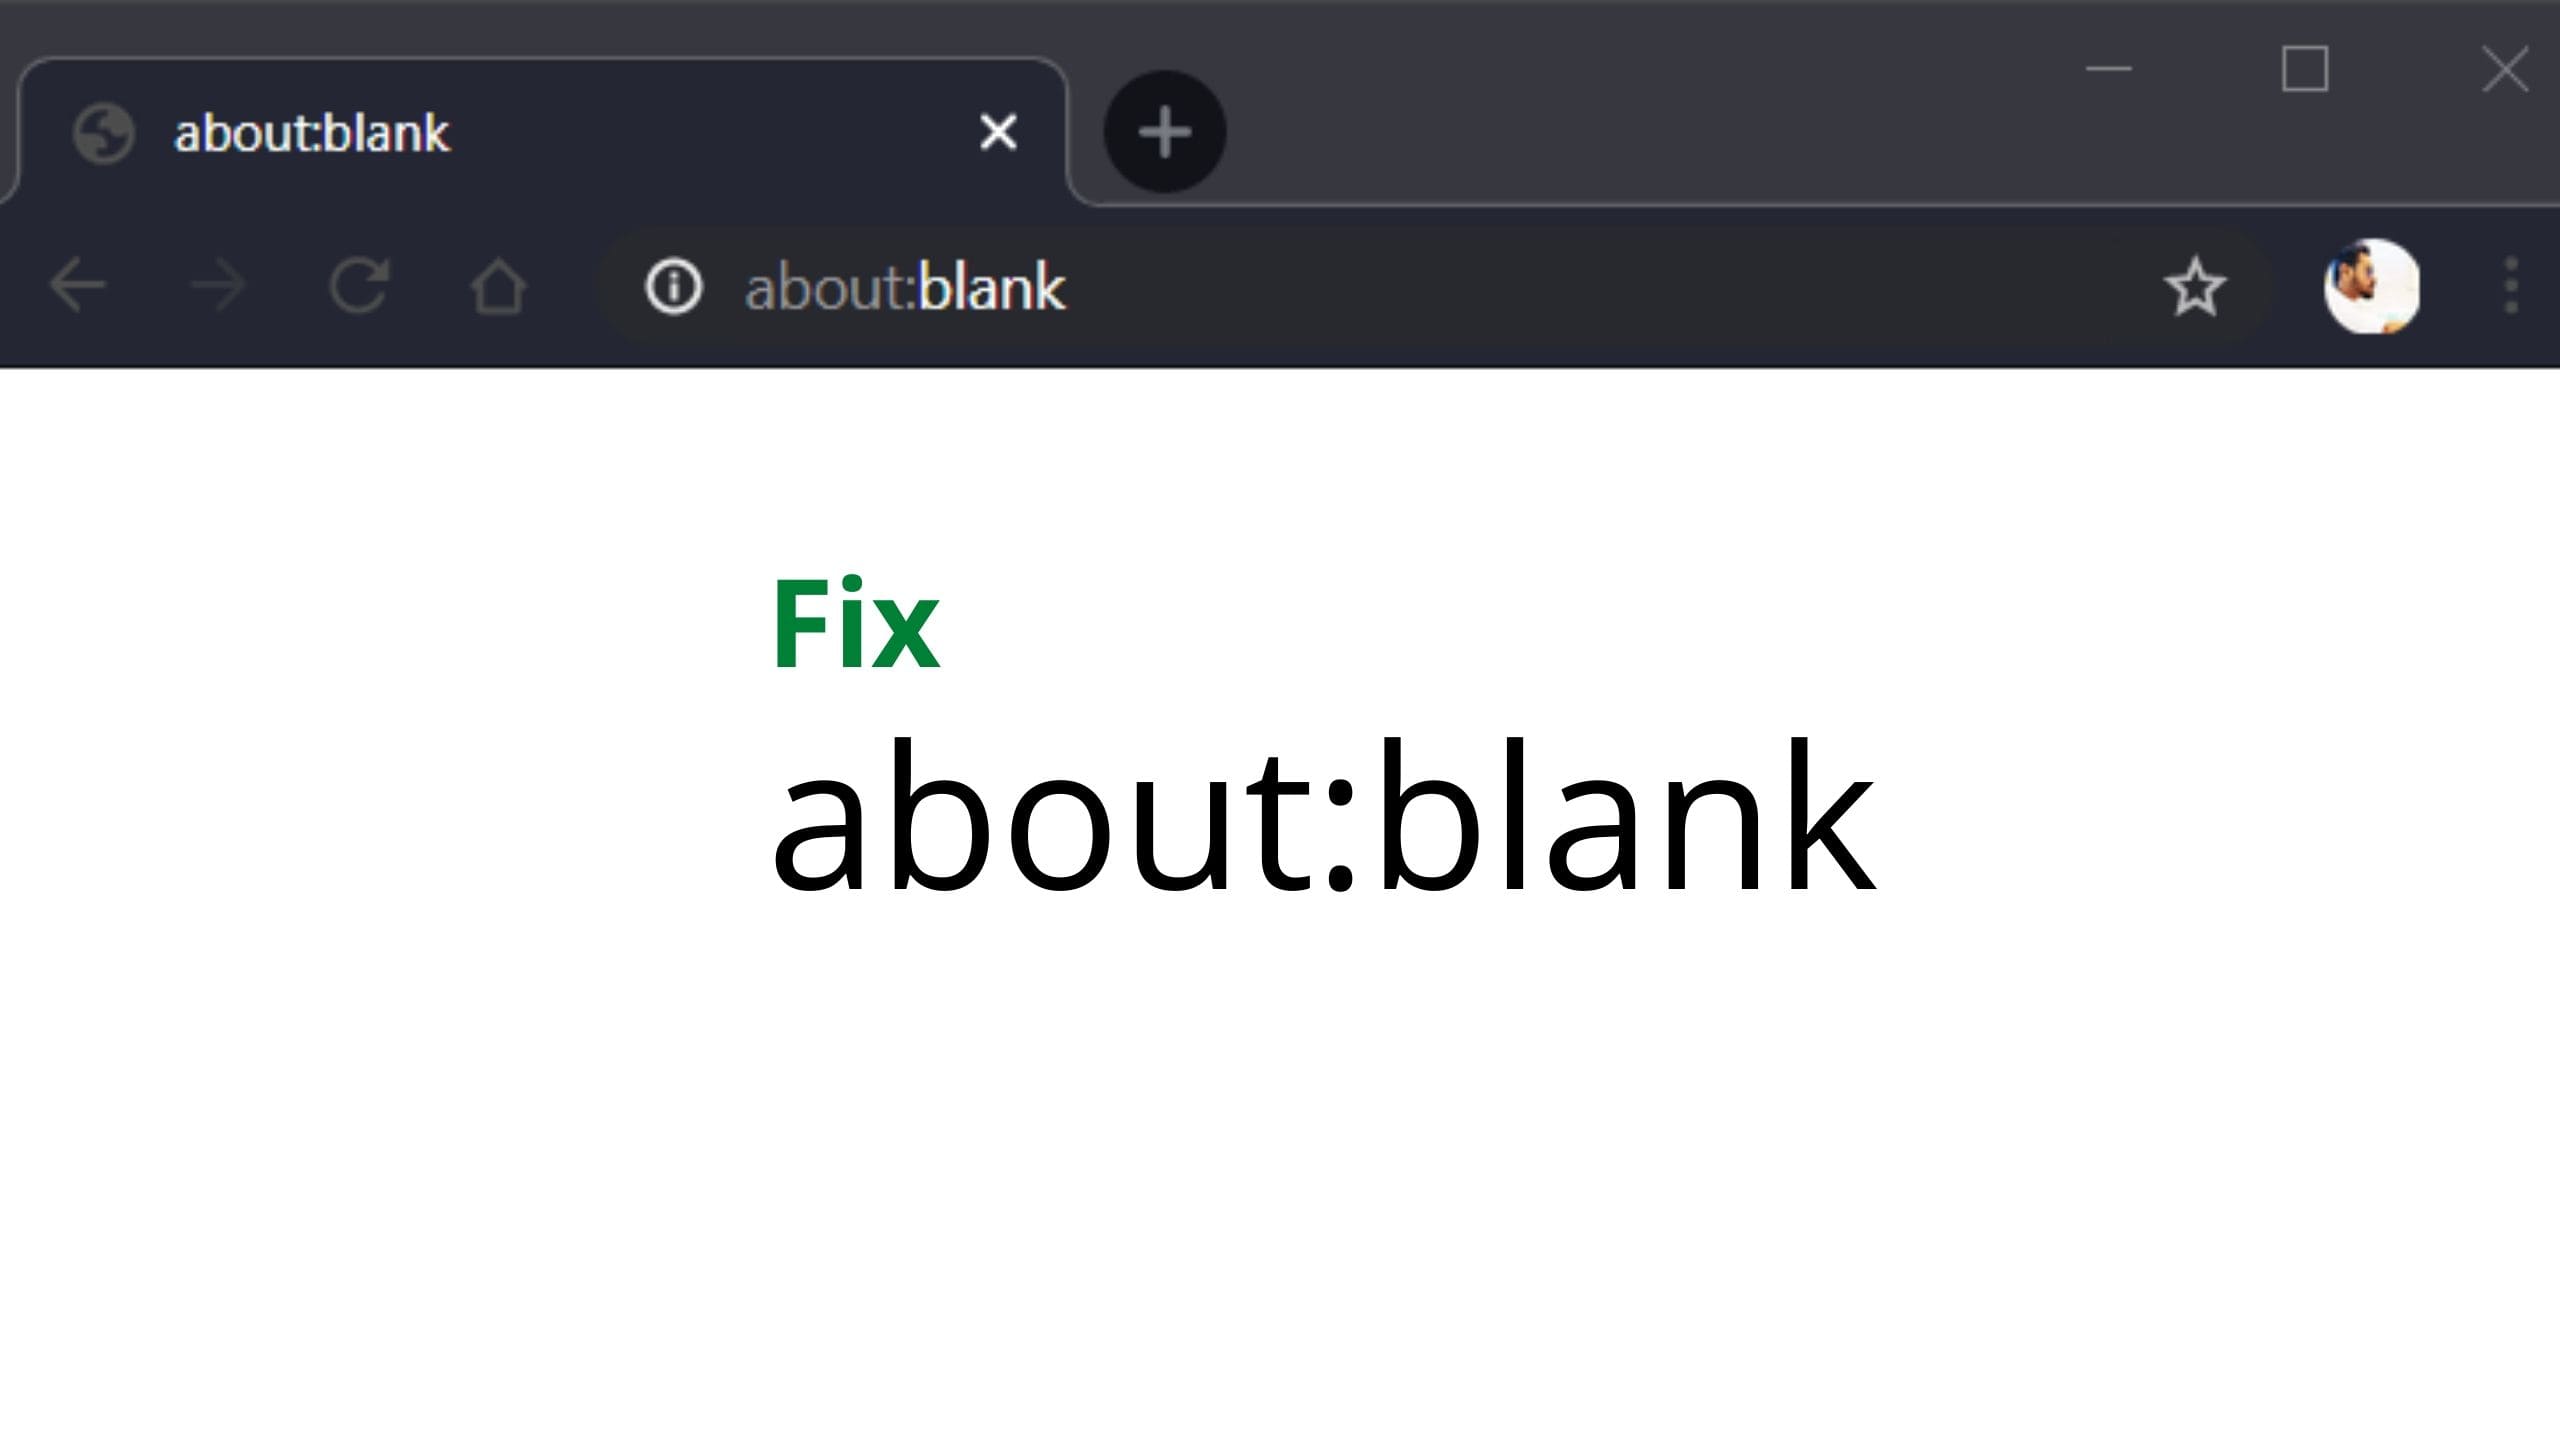 Blank meaning